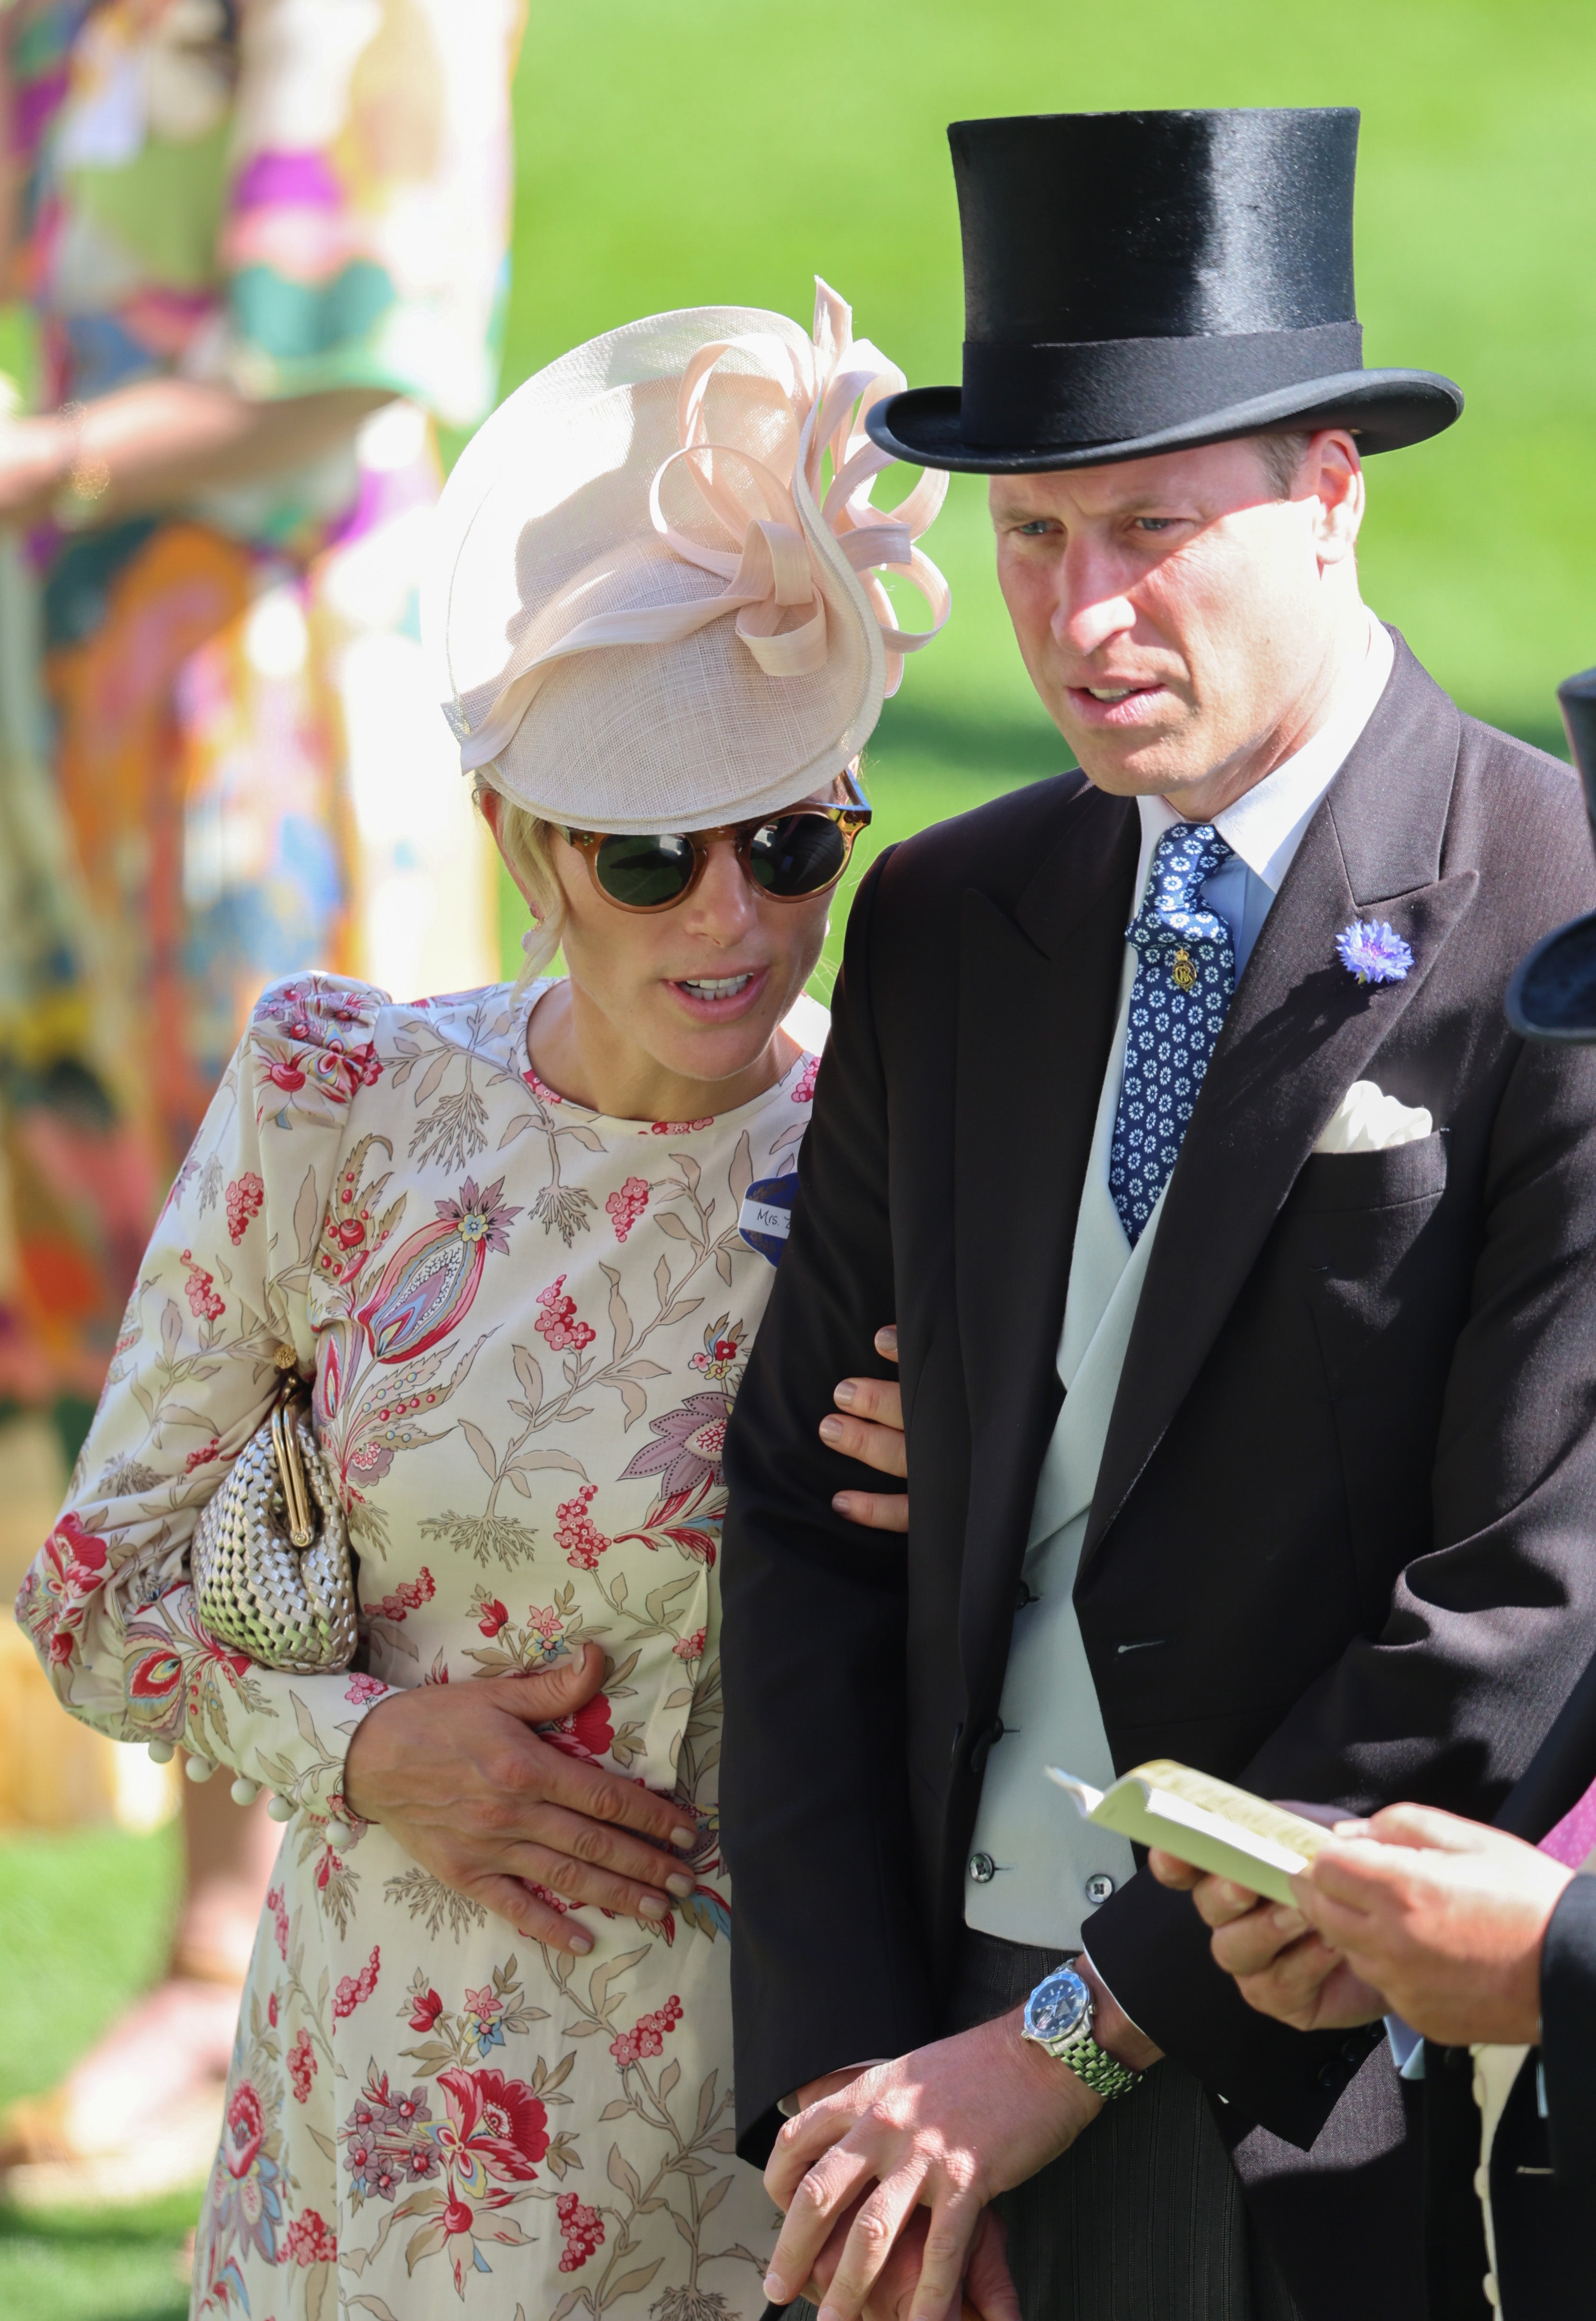 Zara Tindall appeared close to Prince William at day two of Royal Ascot.